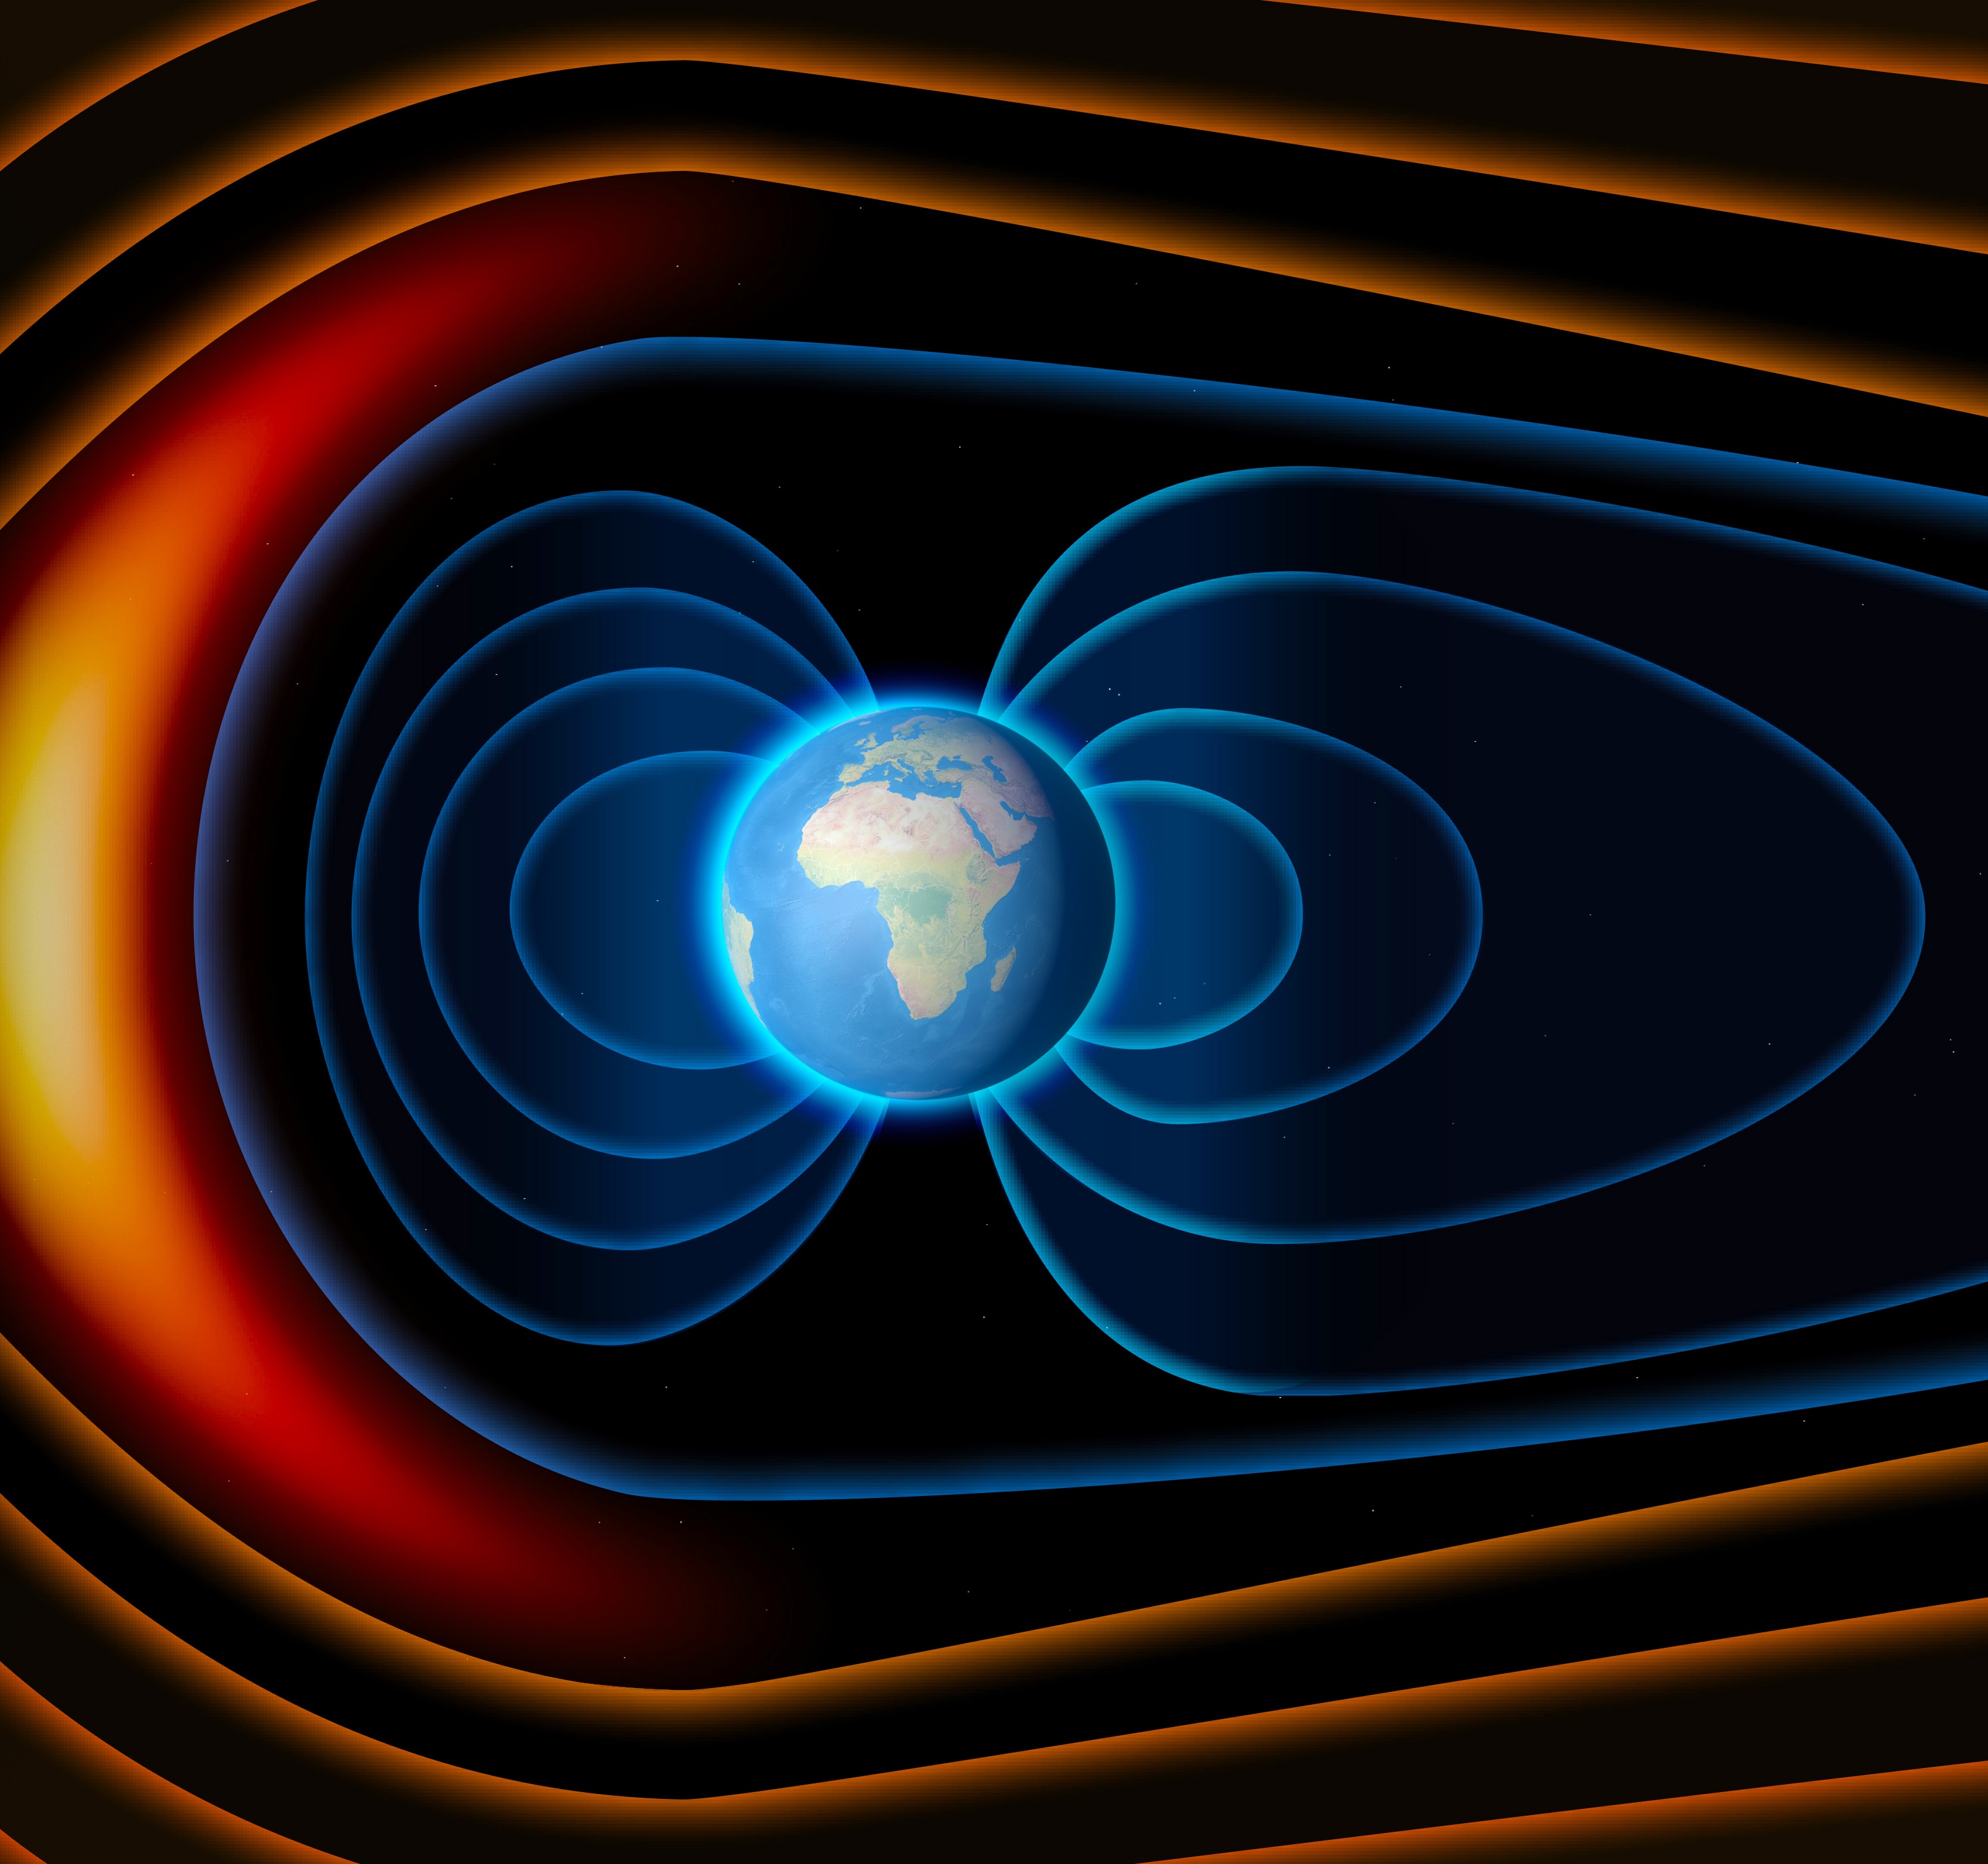 Earth's magnetic field shields it from ionizing particles